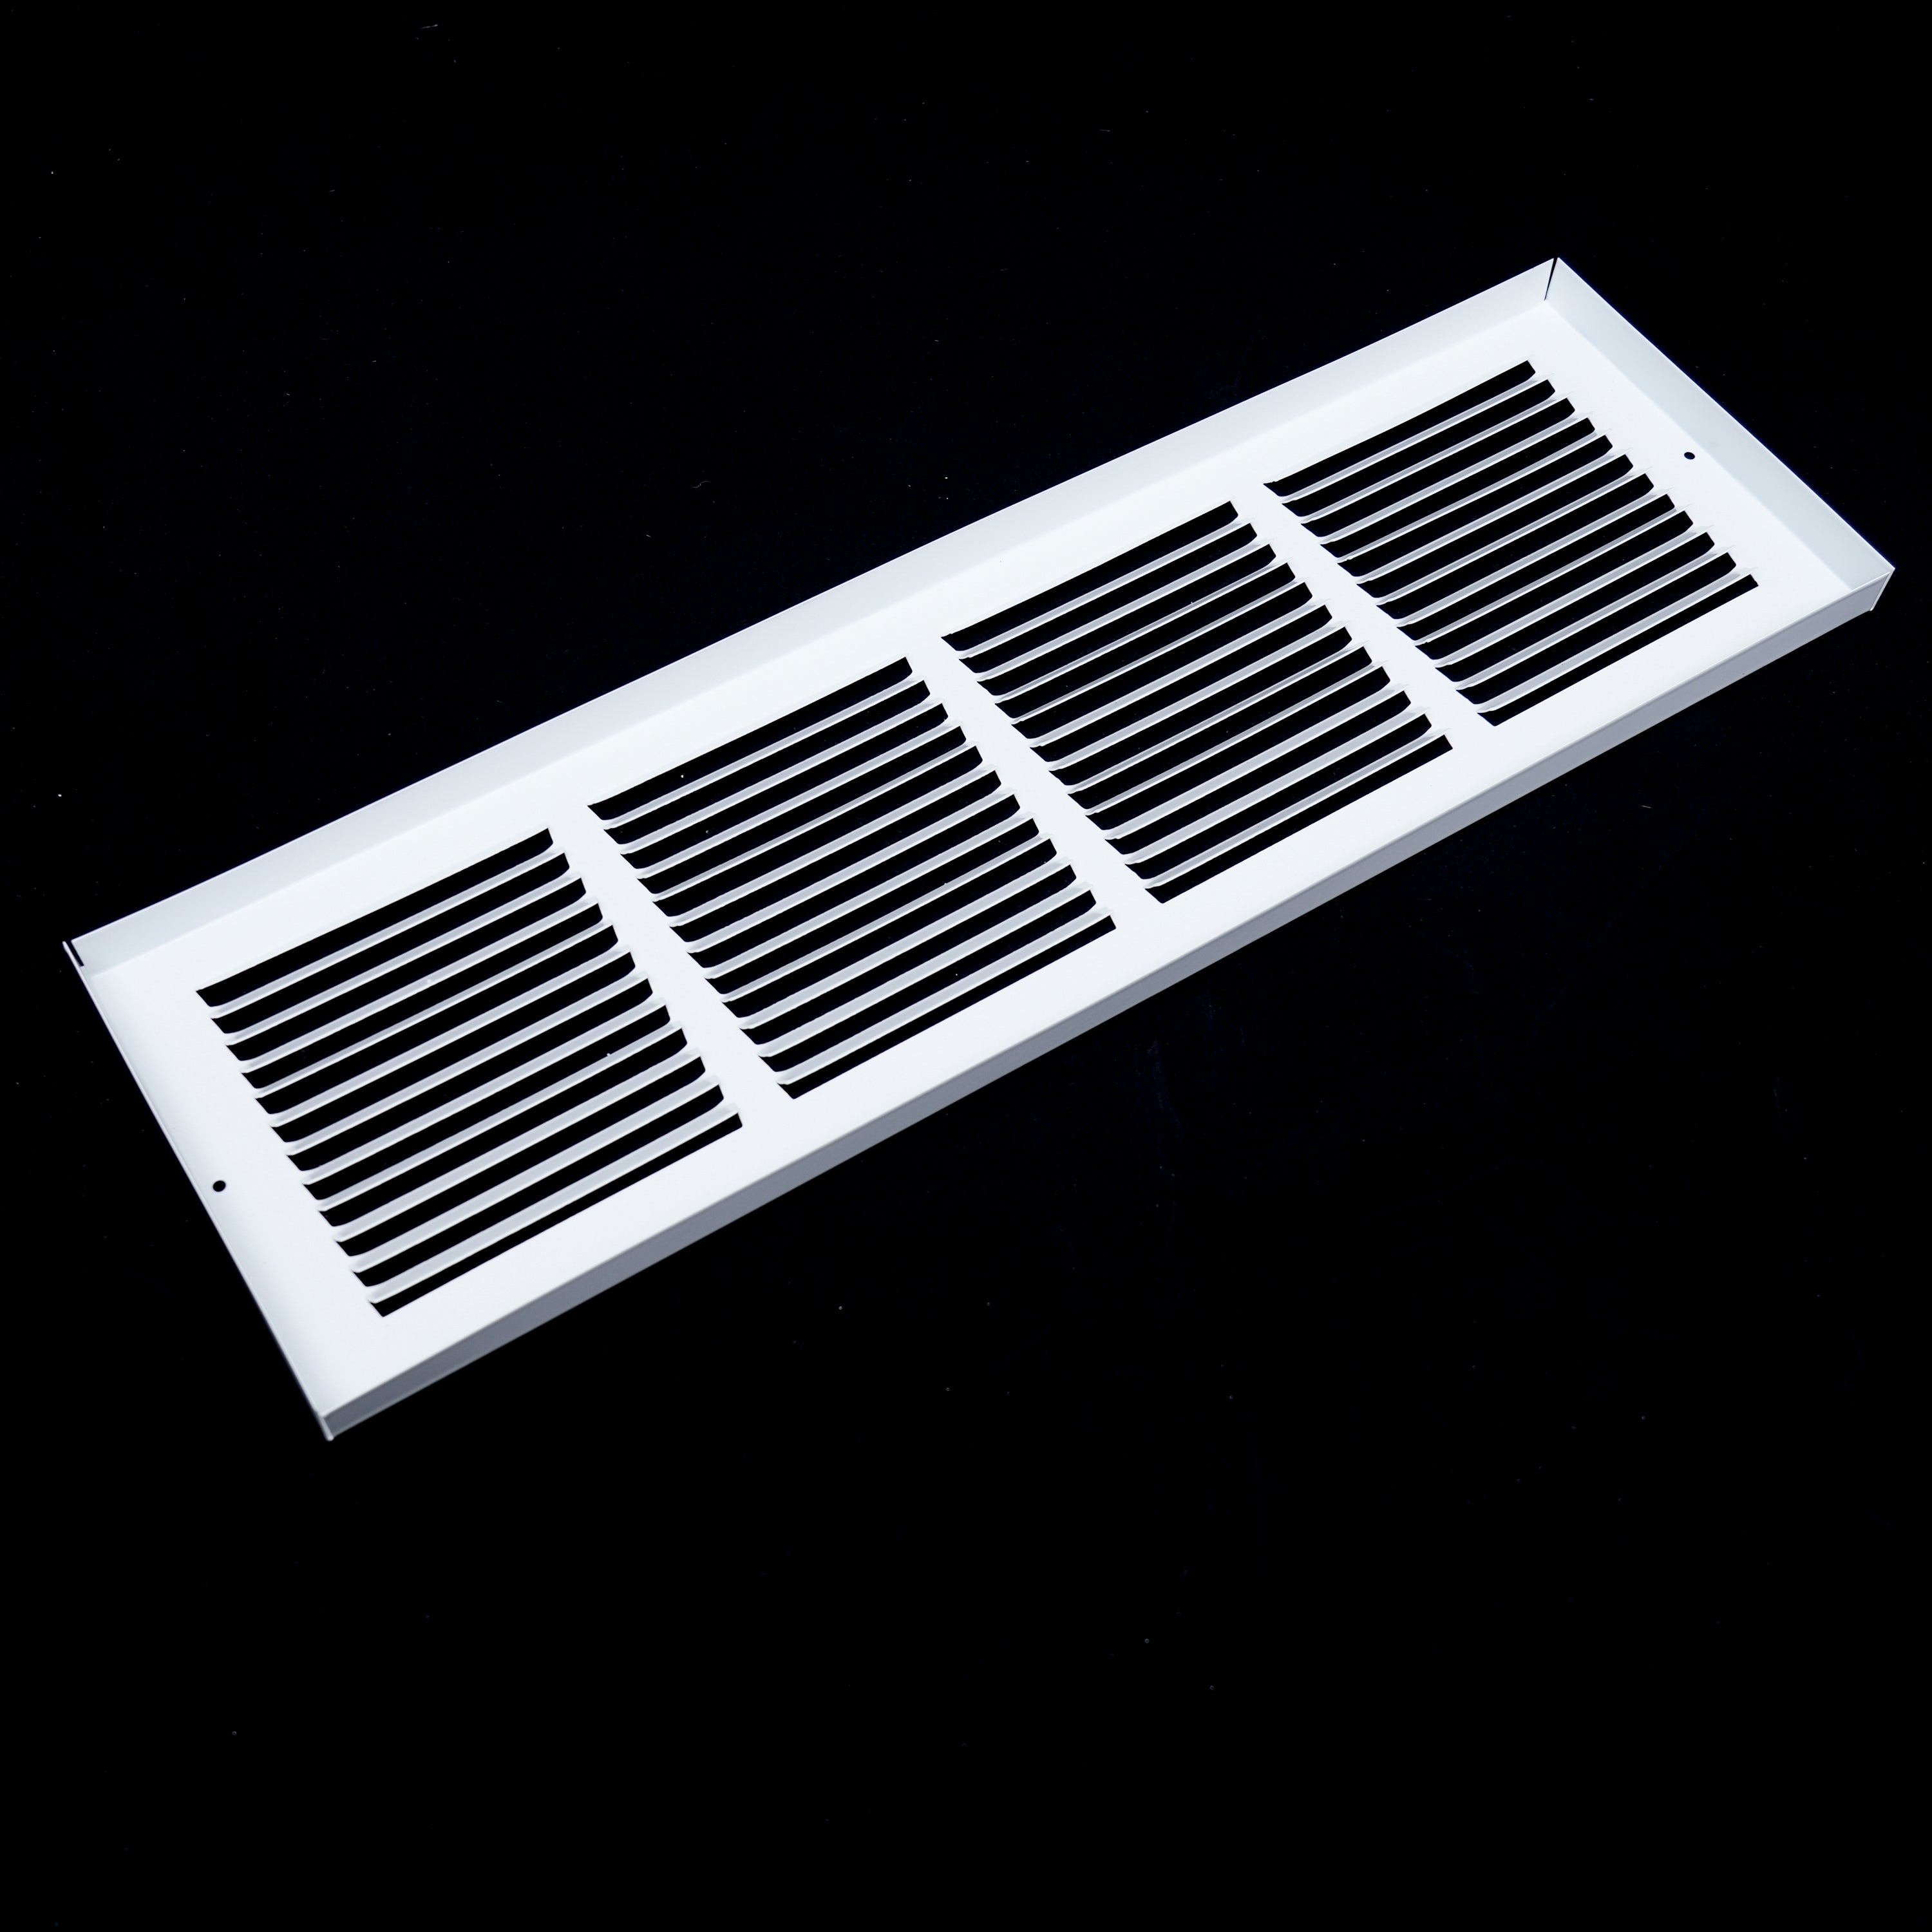 24"W x 8"H  Baseboard Return Air Grille | Vent Cover Grill | 7/8" Margin Turnback to Fit Baseboard | White | Outer Dimensions: 25.75"W X 9.75"H for 24x8 Duct Opening